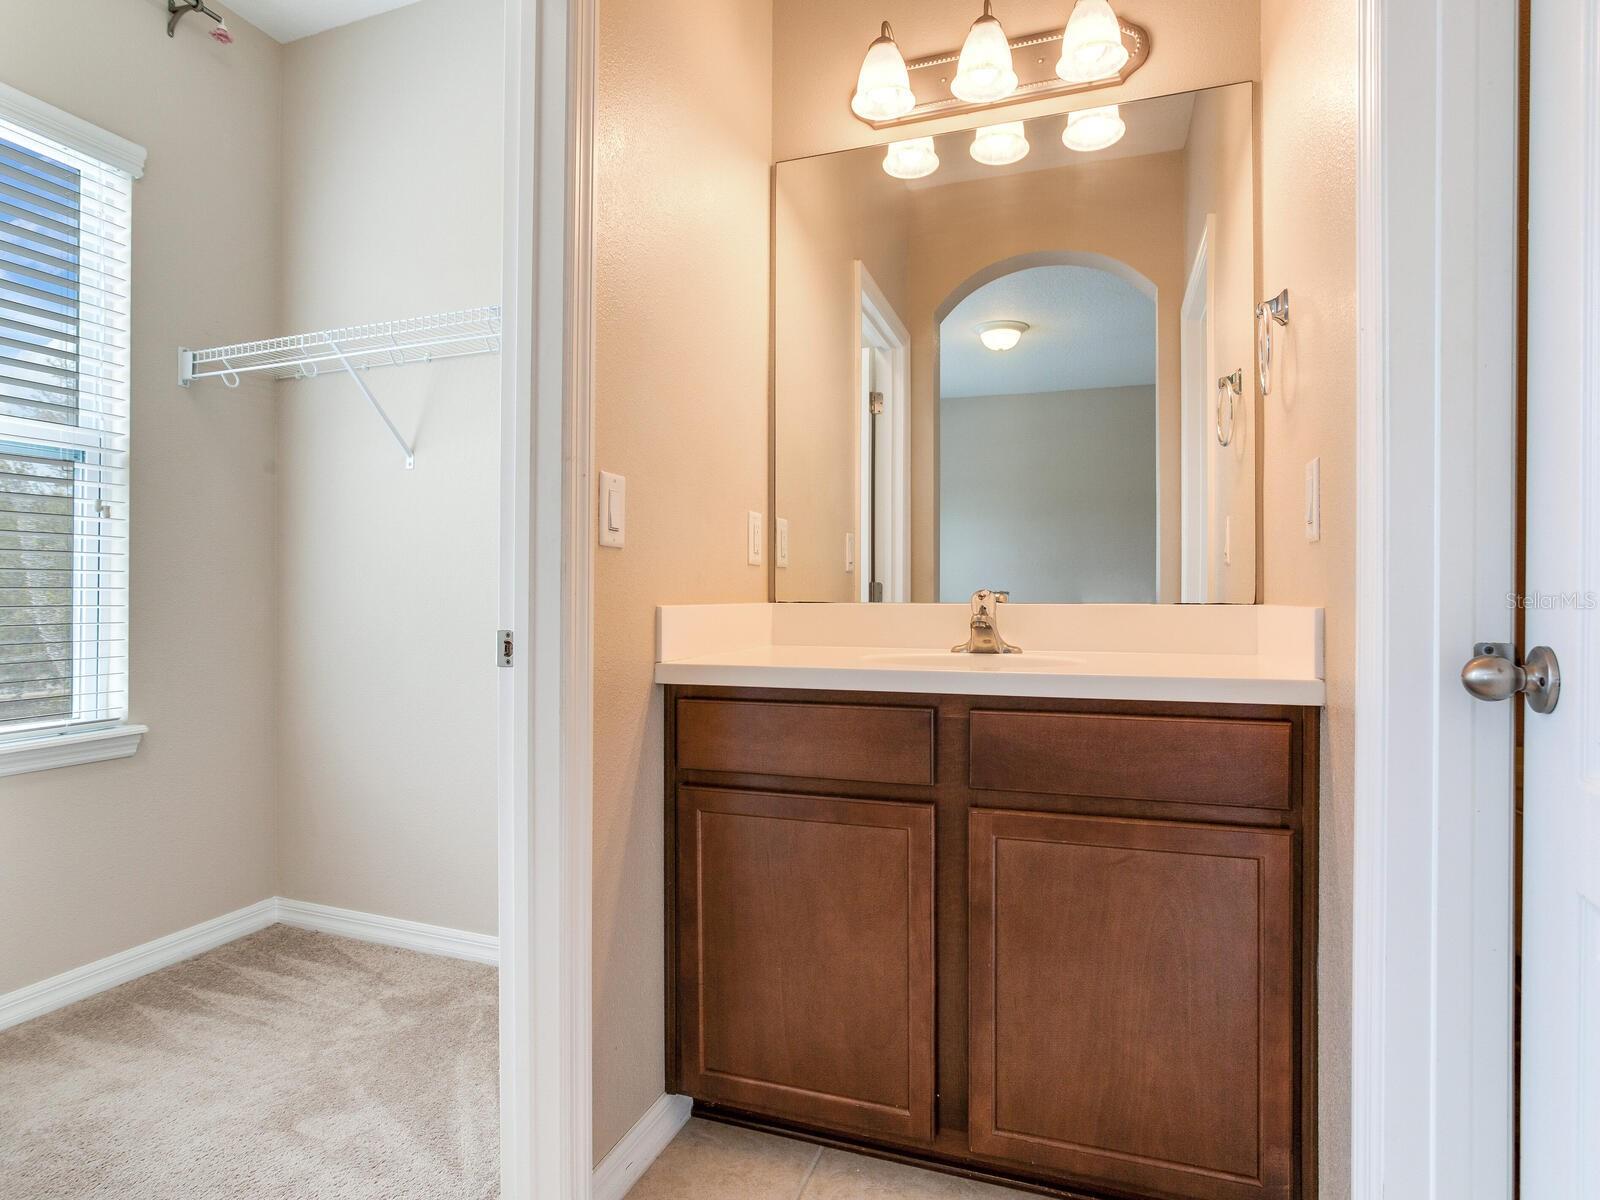 walk-in closet and another vanity room that connect to the jack and jill bathroom and toilet